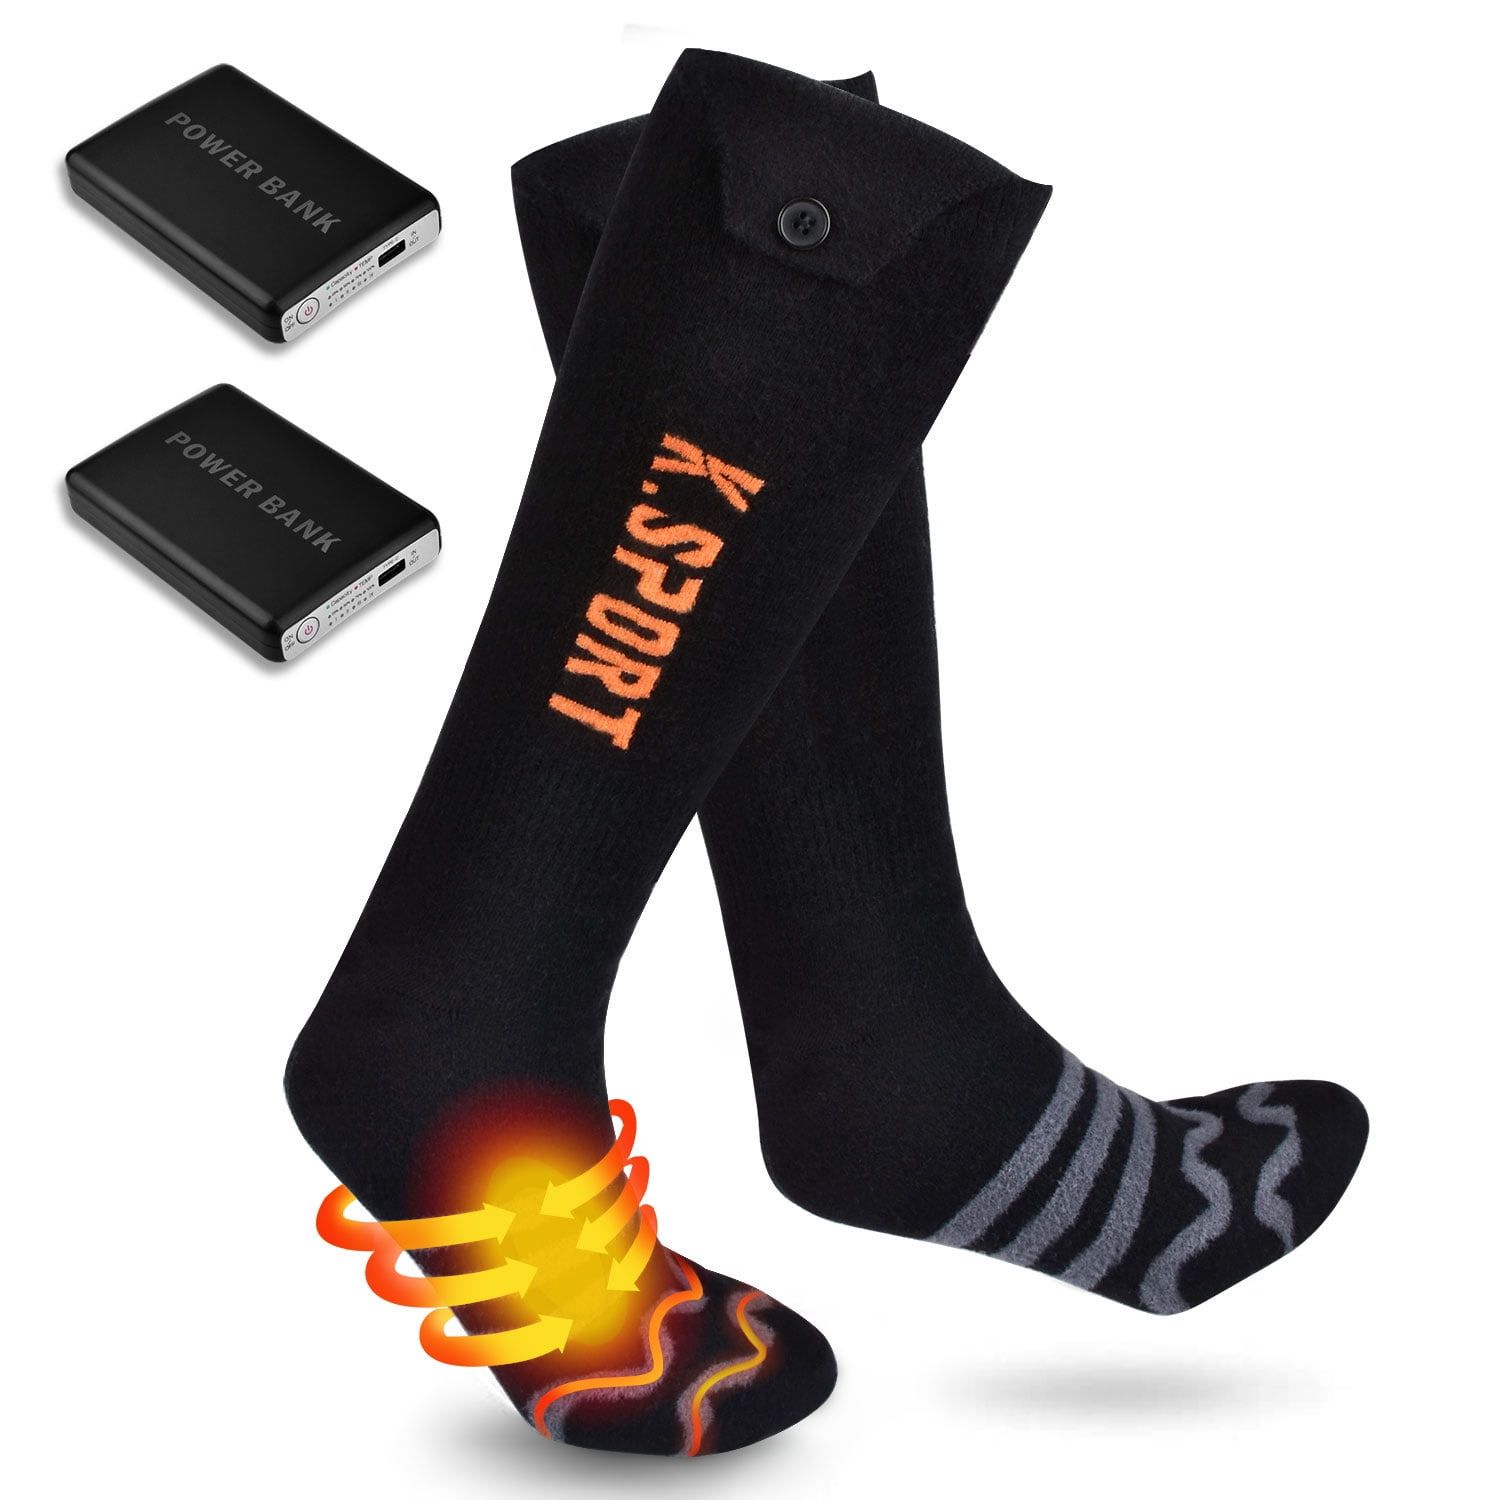 Fishing and Hiking Running Camping Electric Heated Socks Battery Heated Socks for Men Women Winter Thermal Foot Warmer Socks for Skiing 